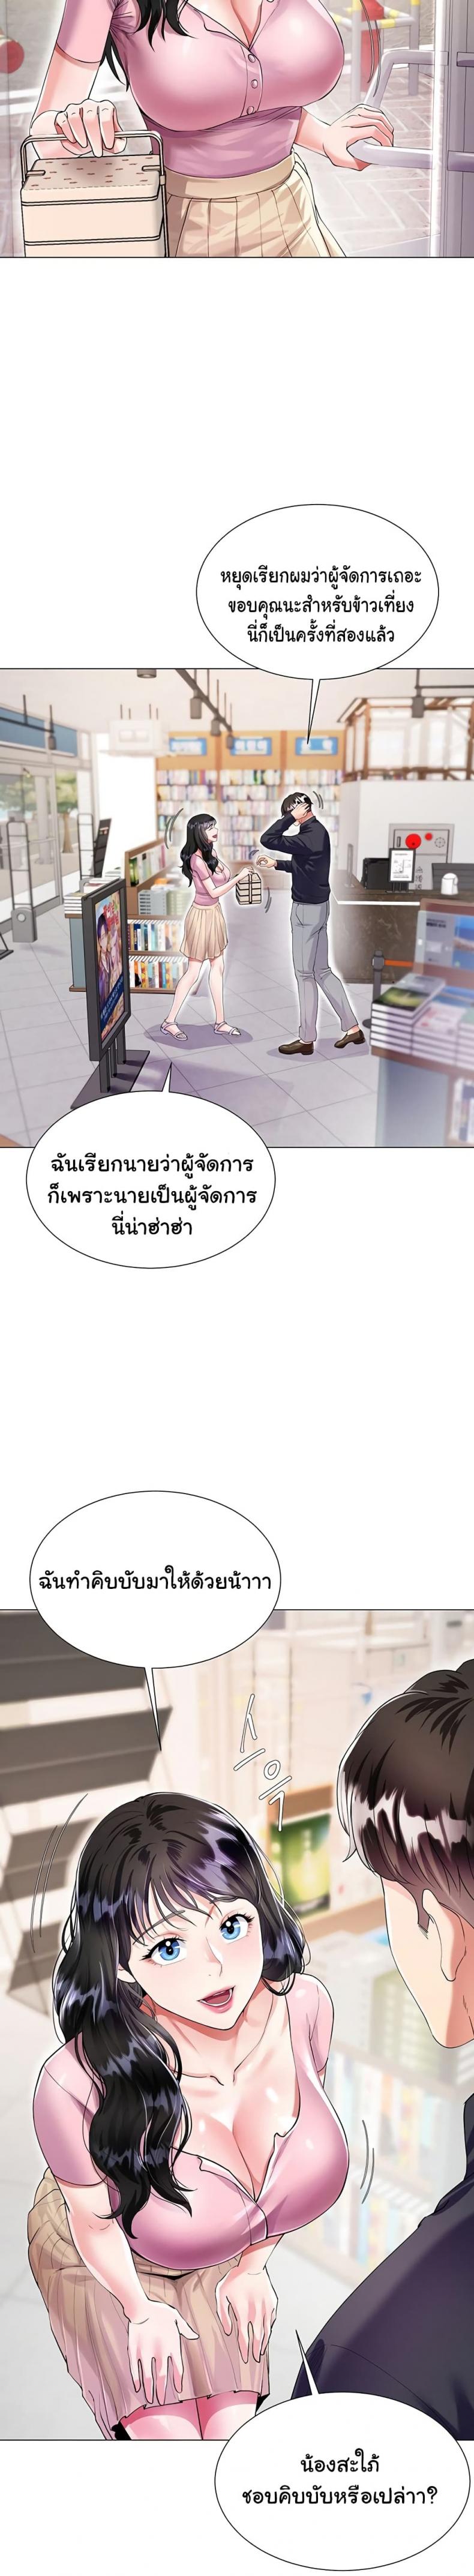 My Sister-in-law’s Skirt 1 ภาพที่ 20